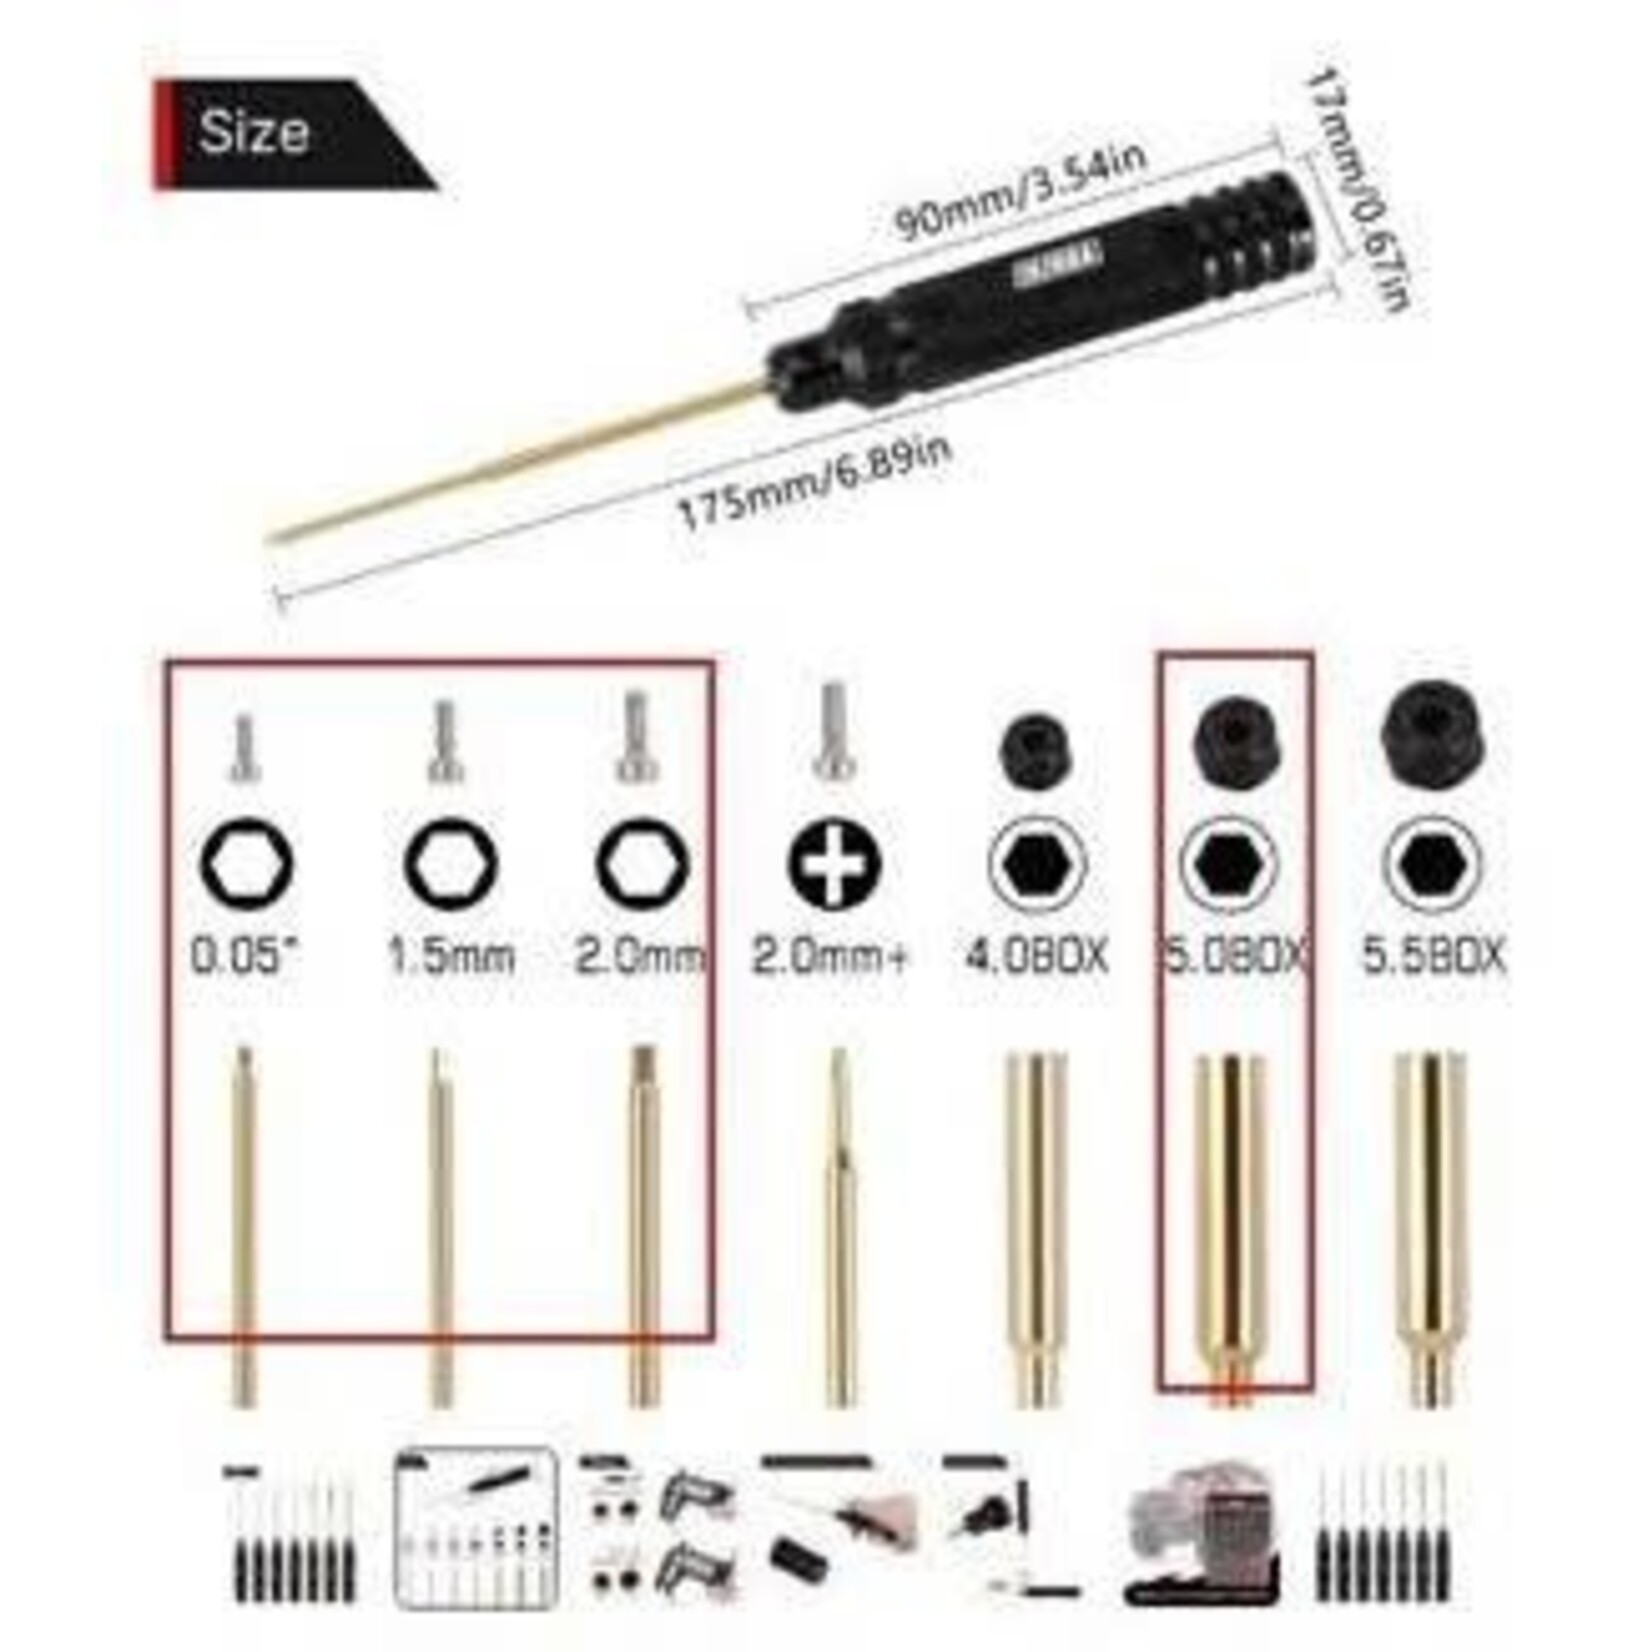 Hobby Details TRX-4M Tool Kit Hex 0.05"/1.5mm/2.0mm and 5.0mm Nut Driver Steel, Chrome Plated